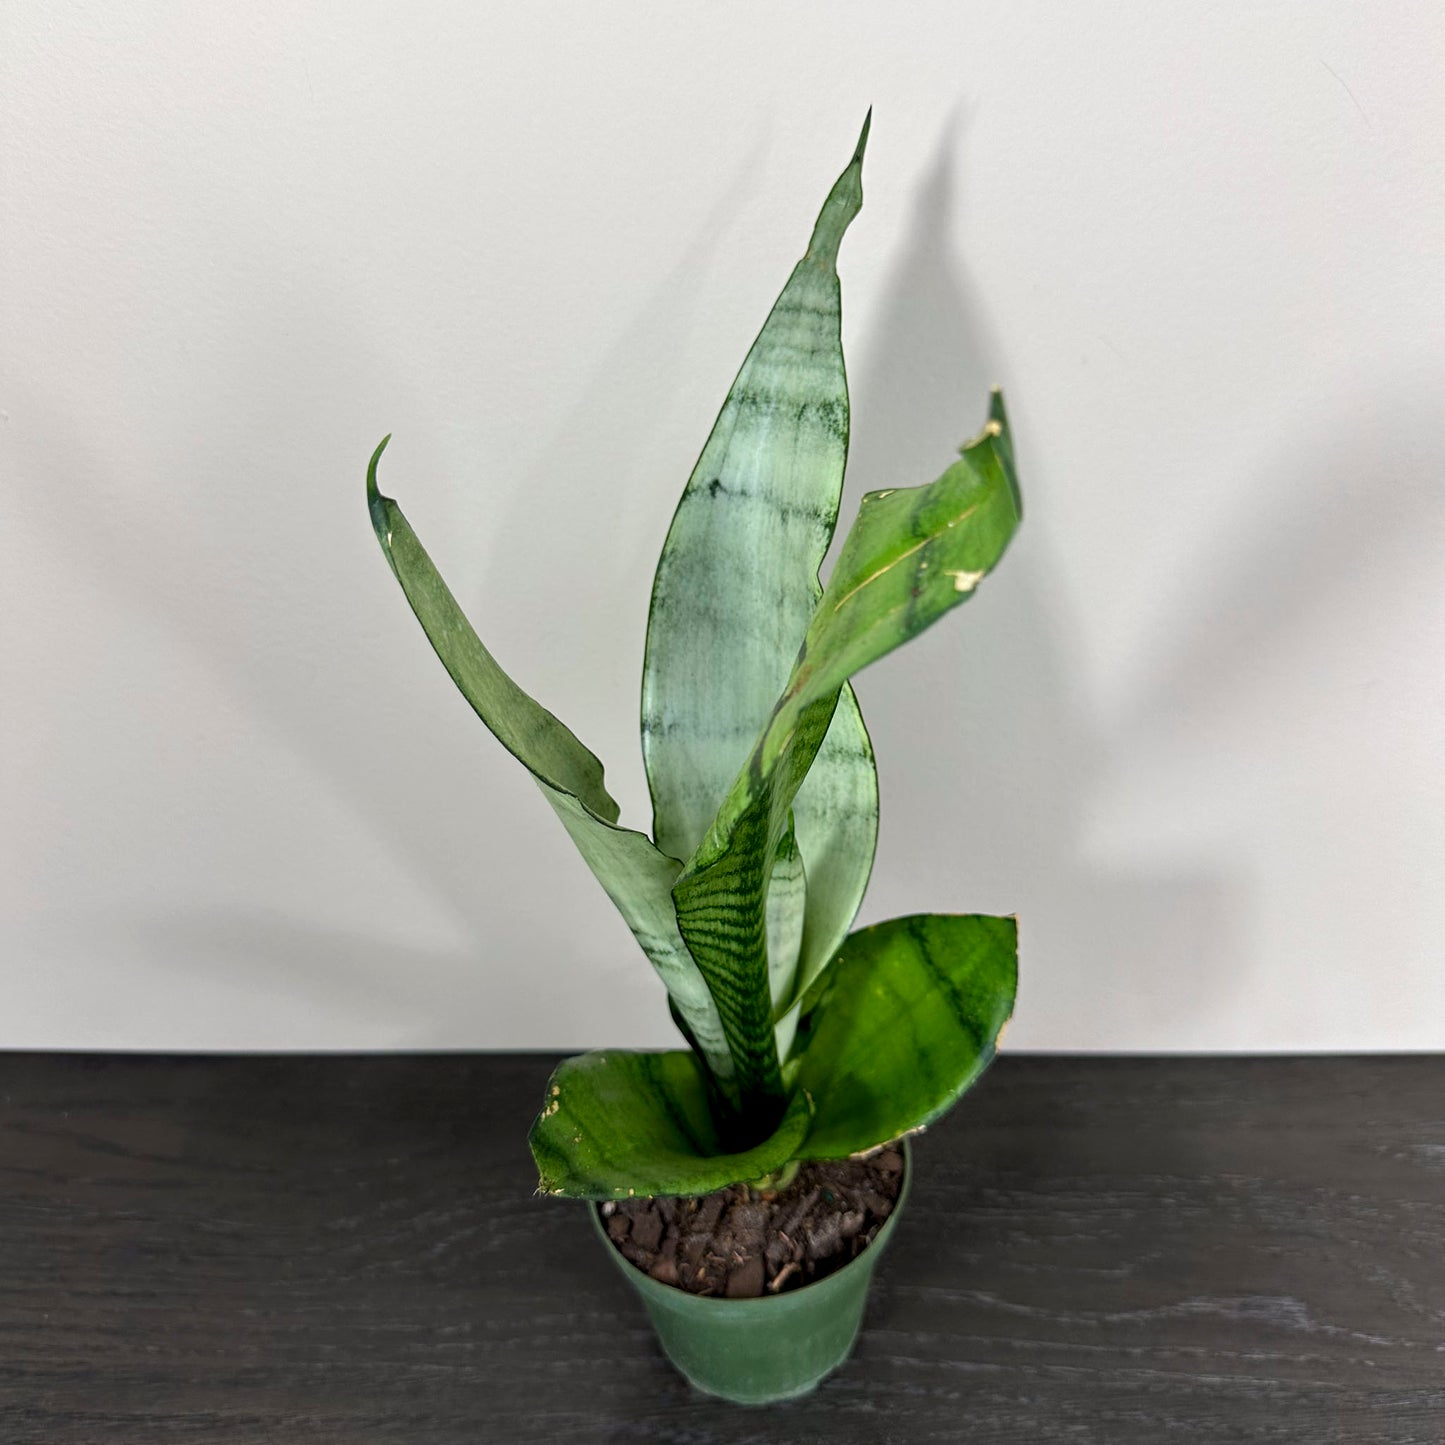 Sansevieria 'Moonshine' - A stylish and silvery-gray succulent with unique foliage.